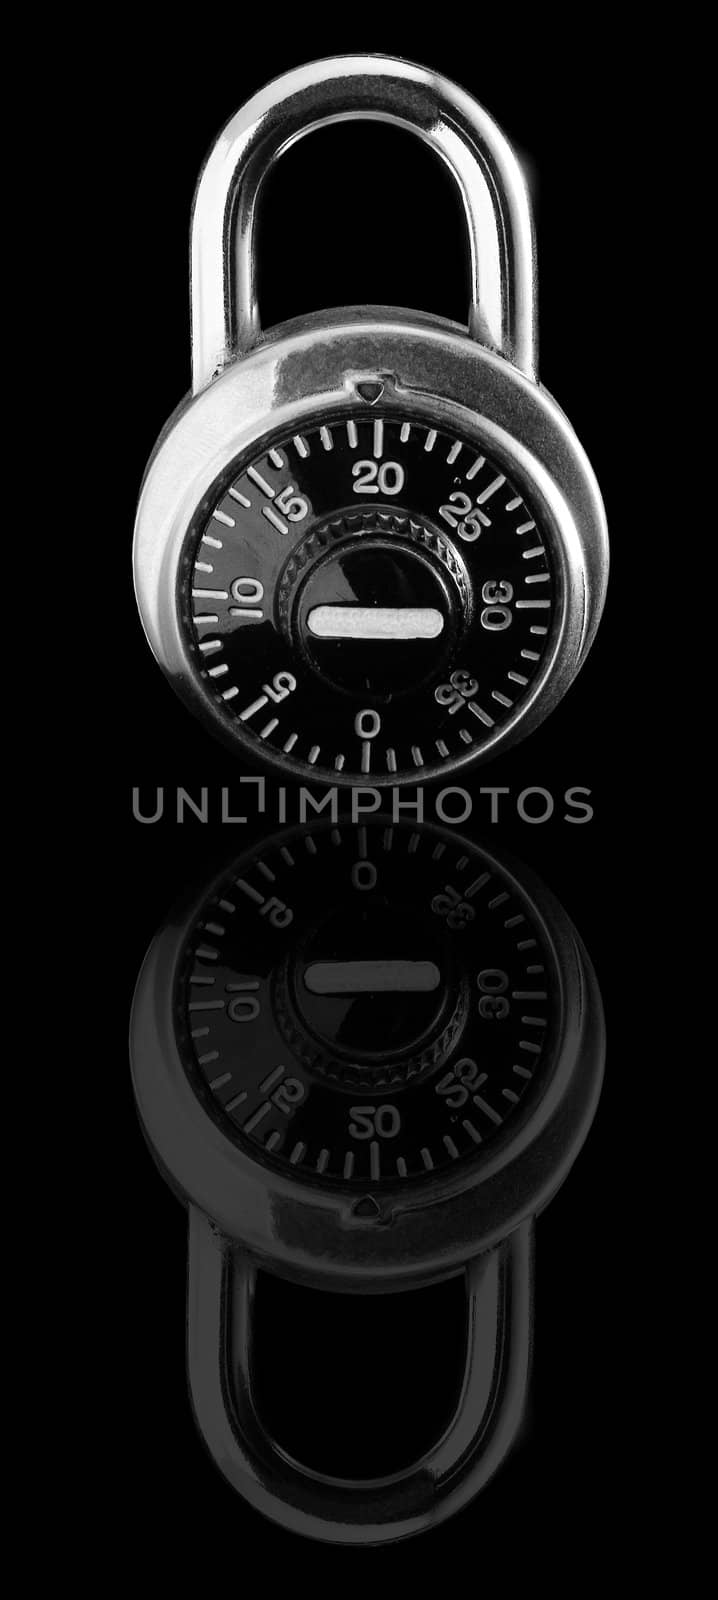 Combination lock on black background with reflection.